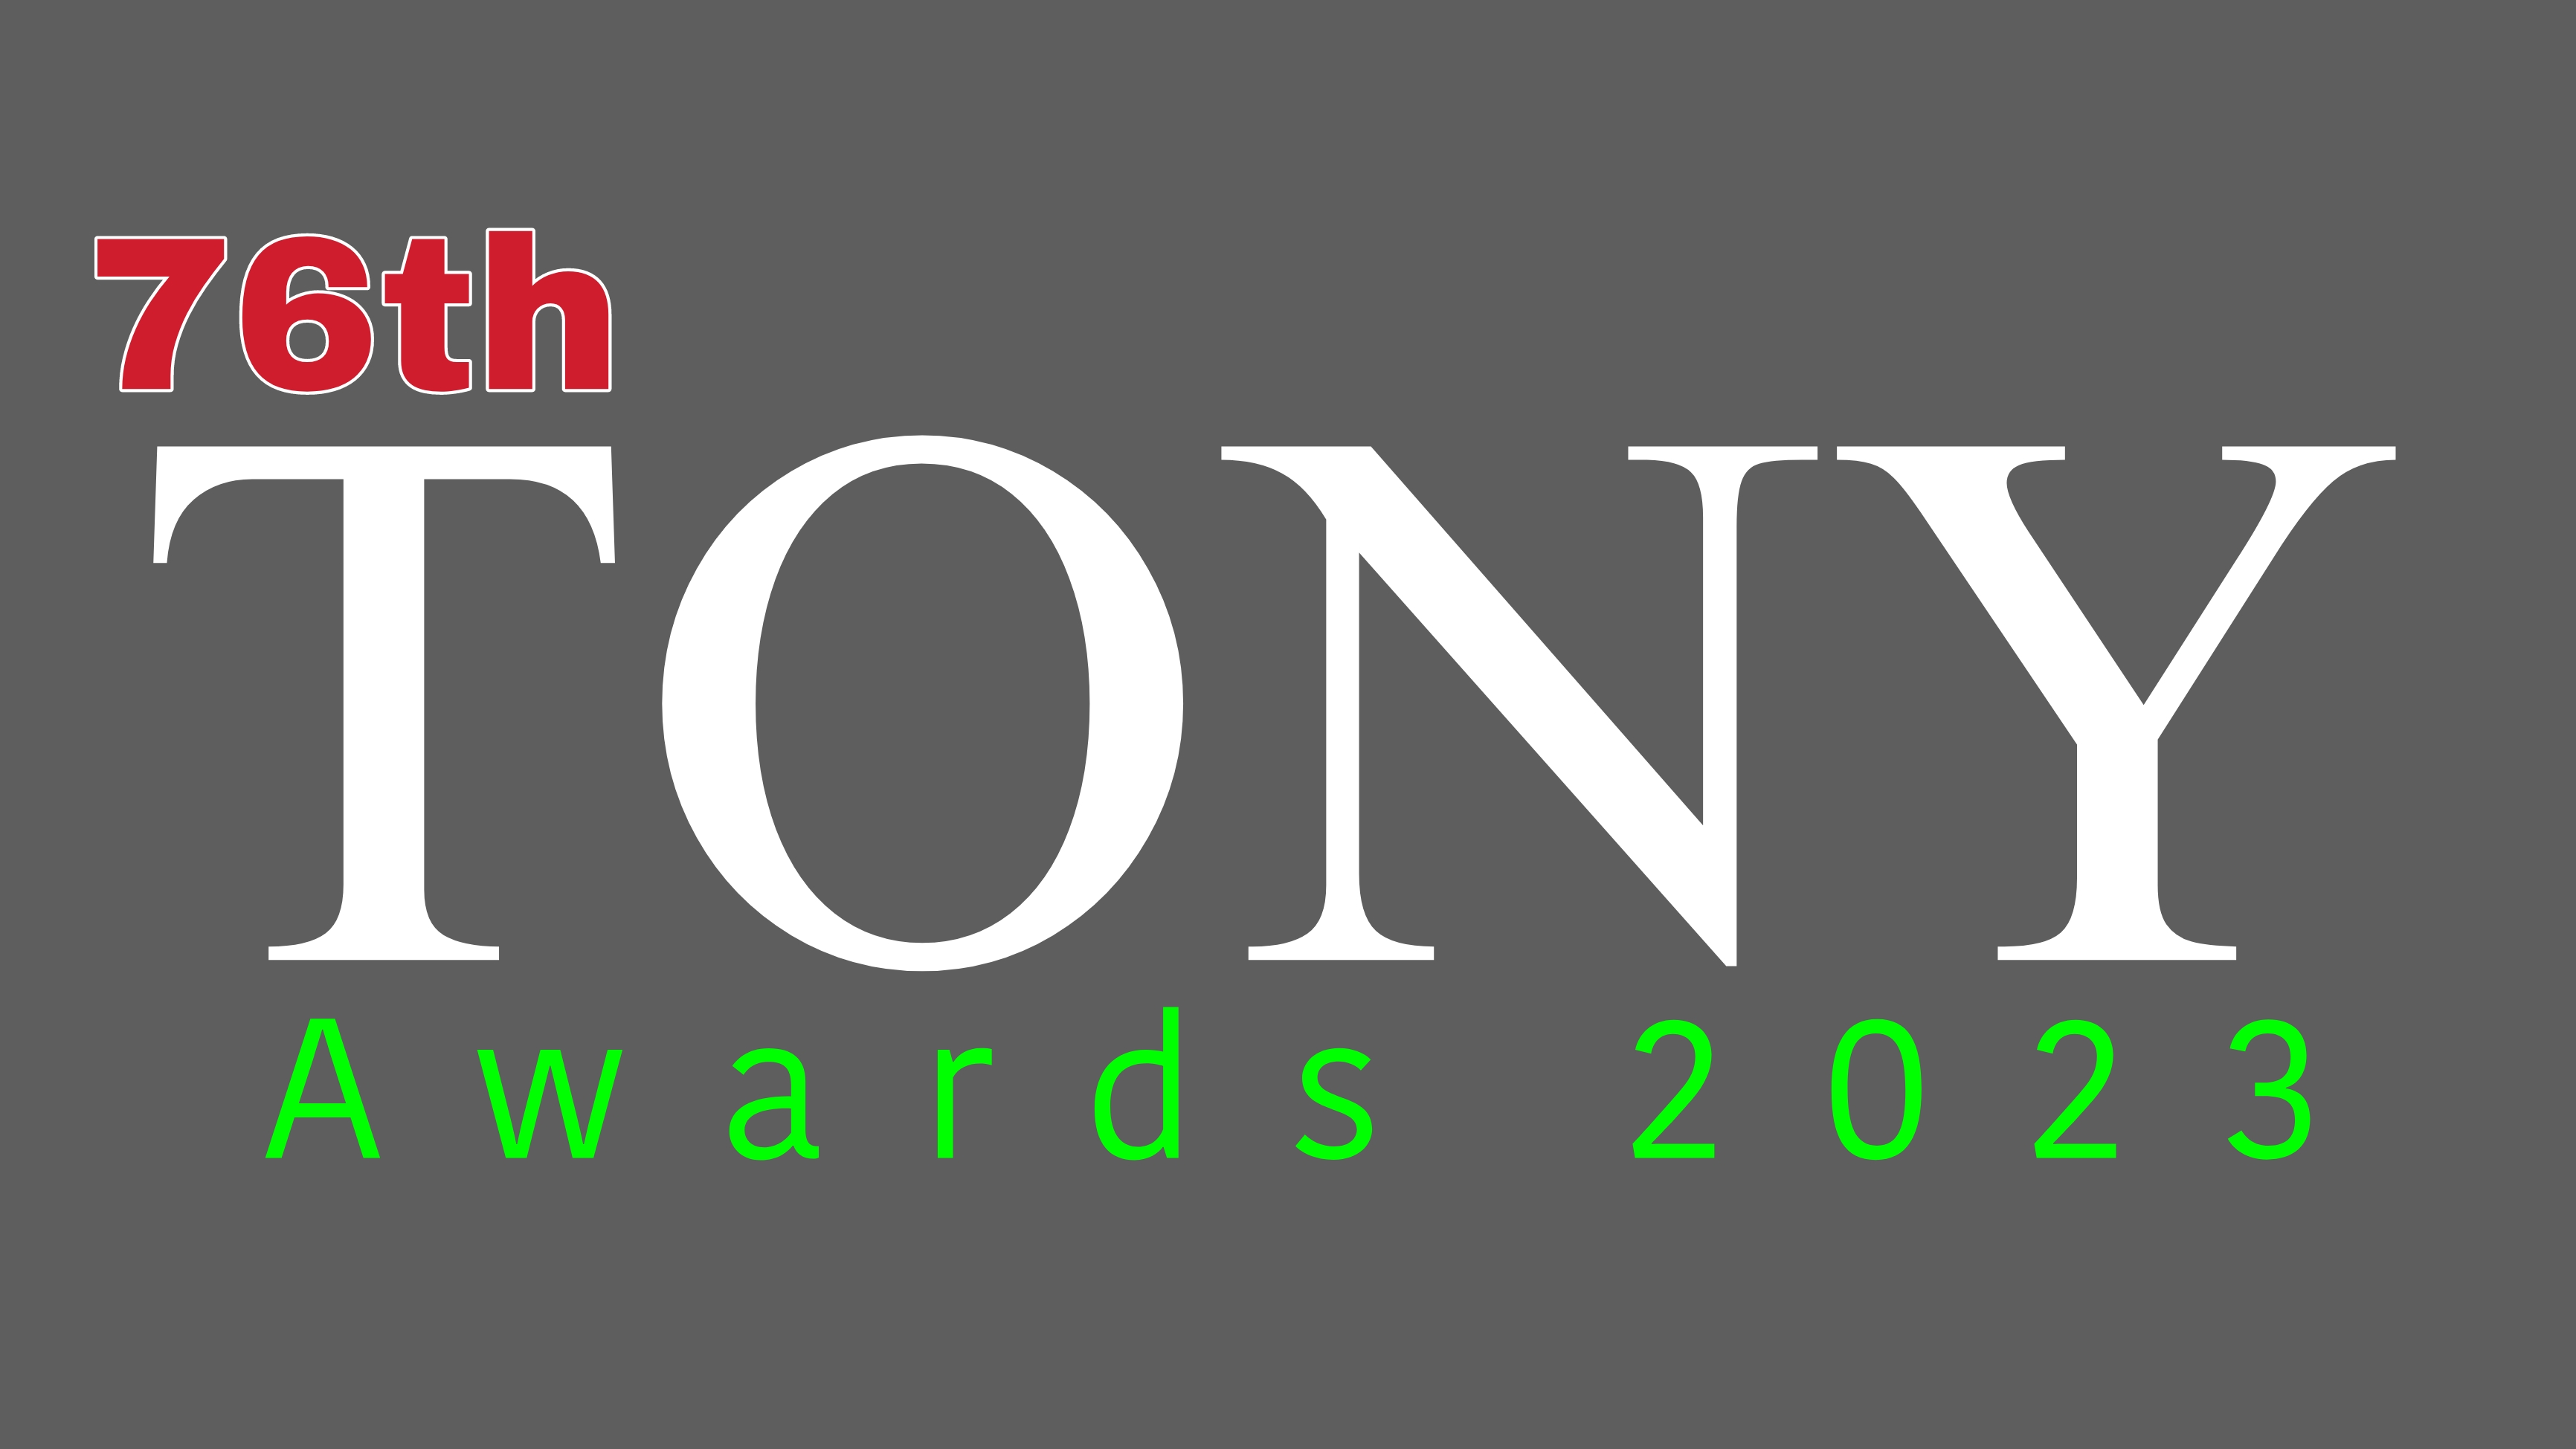 Triumph at the 76th Annual Tony Awards Celebrating Excellence in